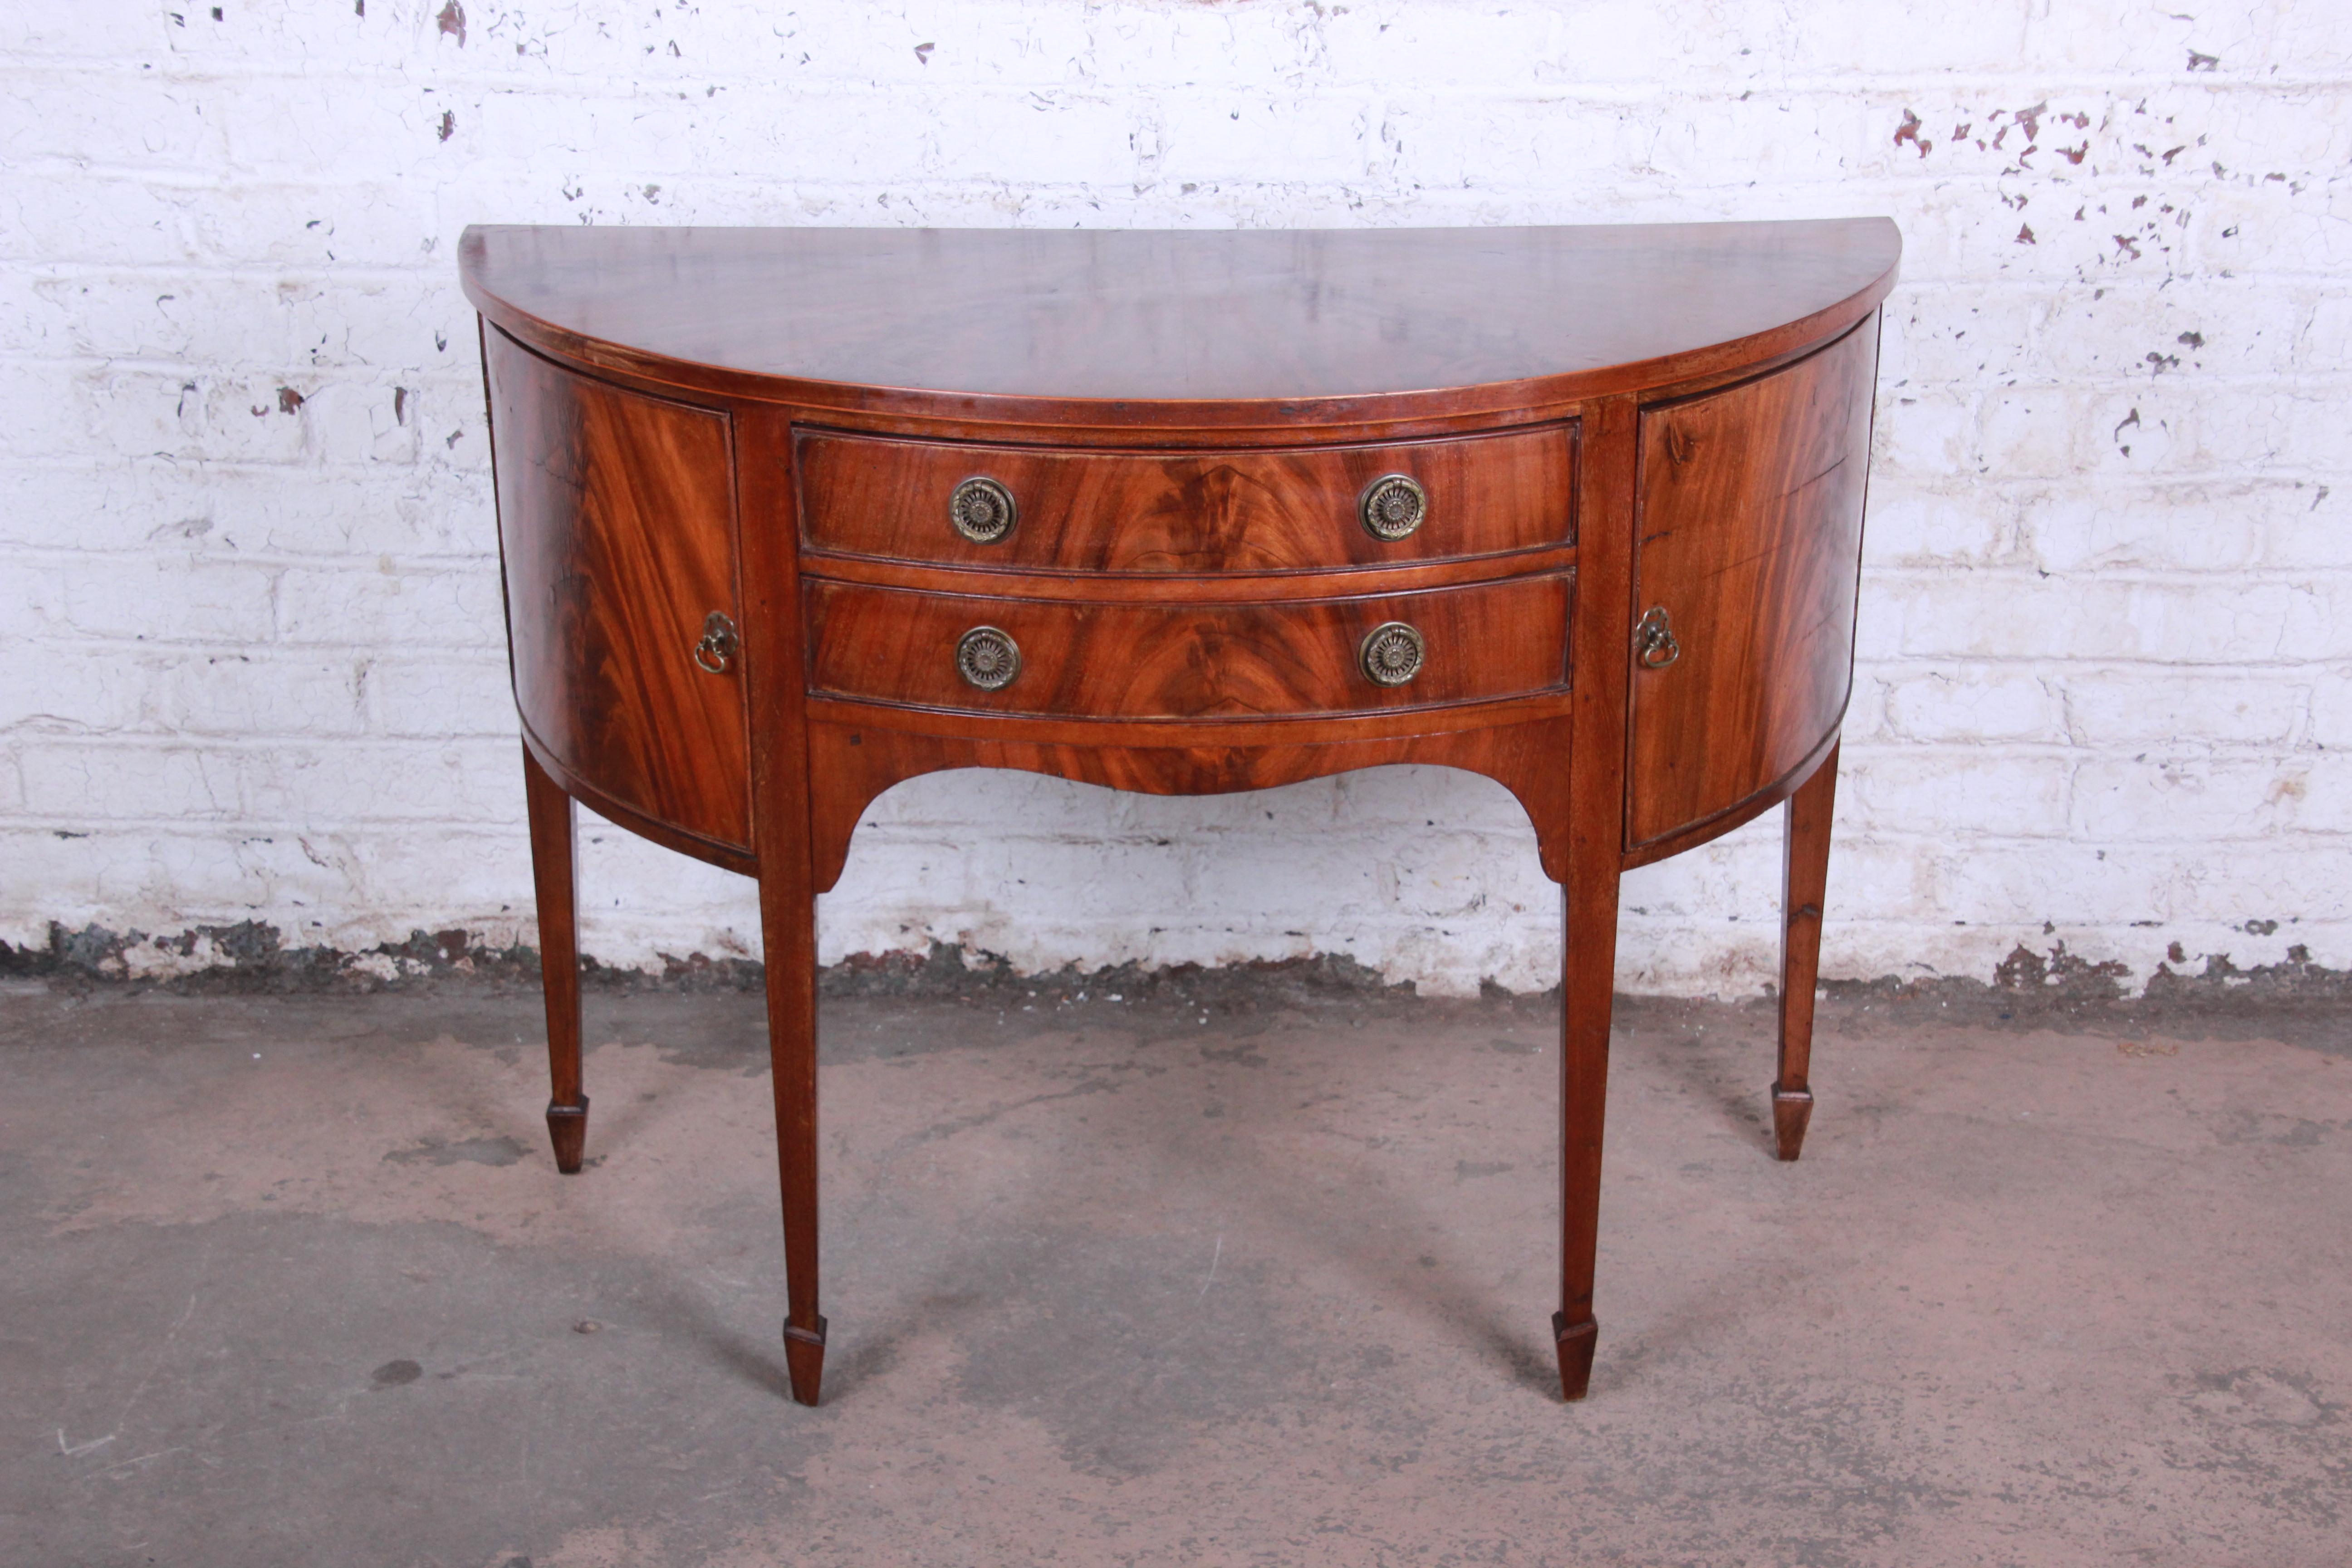 A gorgeous 19th century flame mahogany demilune sideboard cabinet. The sideboard features stunning flamed mahogany wood grain and a nice traditional style. It offers good storage, with open cabinet space behind curved doors on each end and two